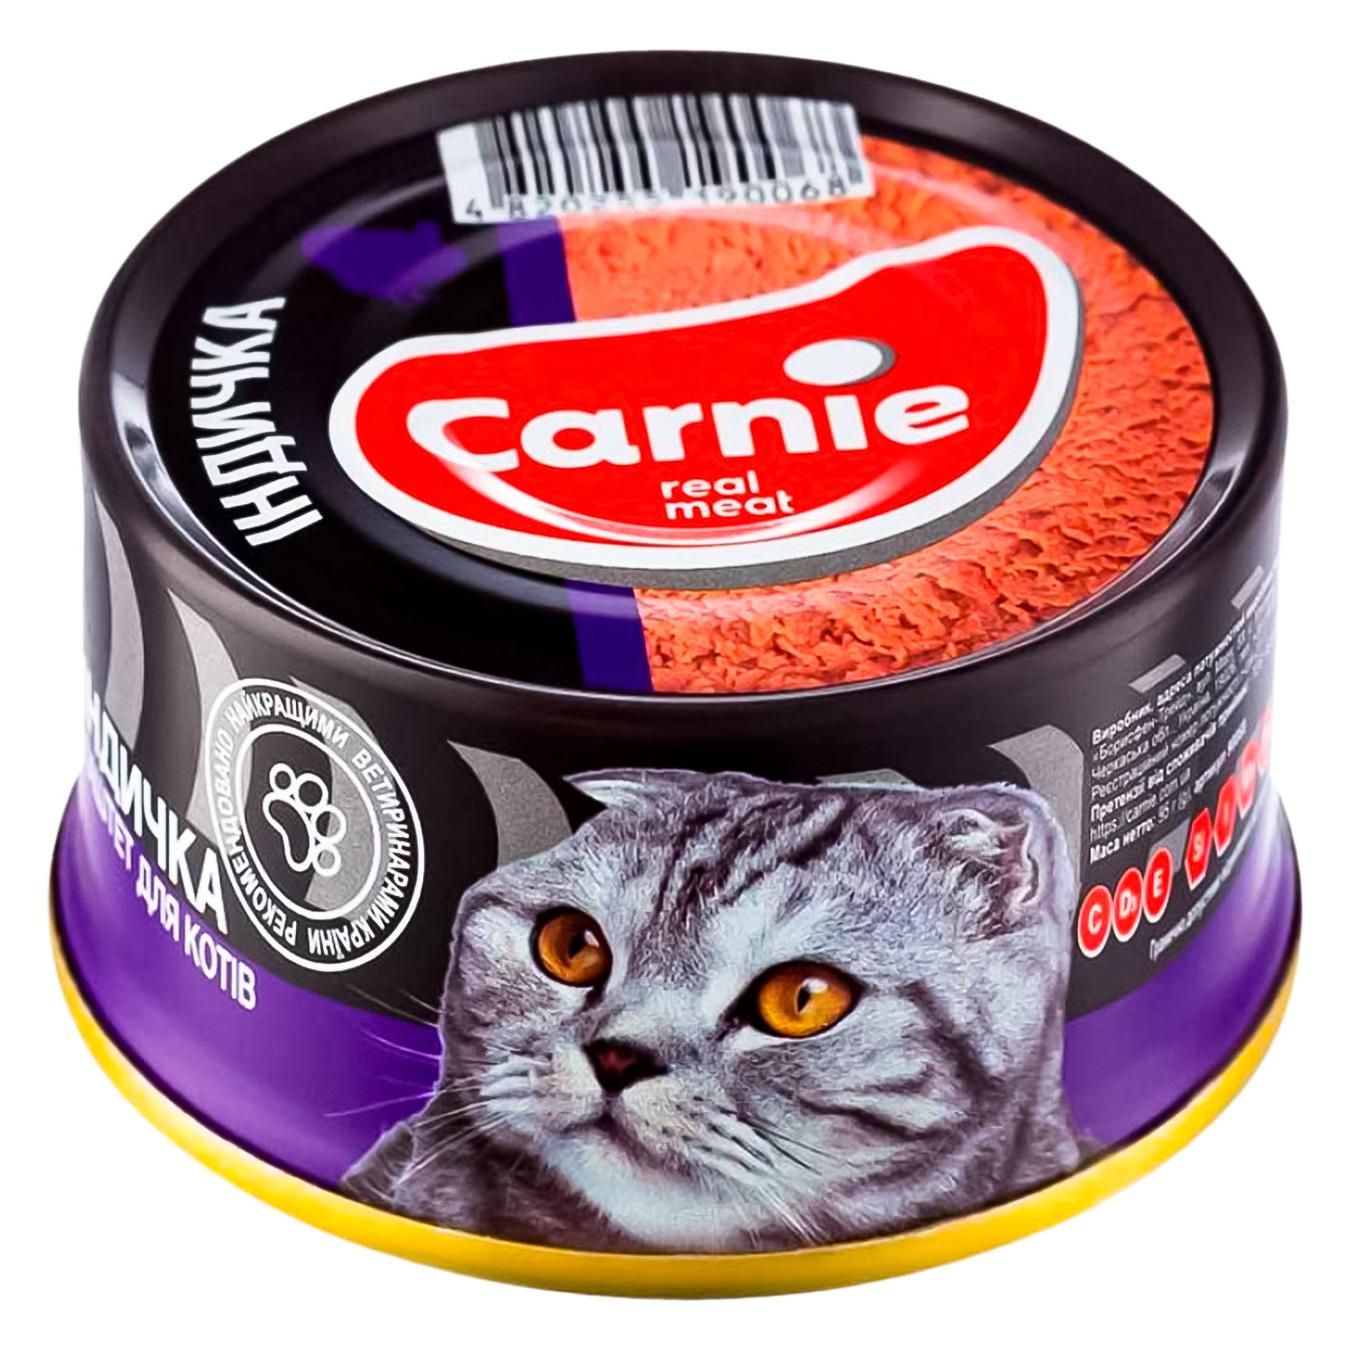 Carnie cat food canned meat pate with turkey 100g